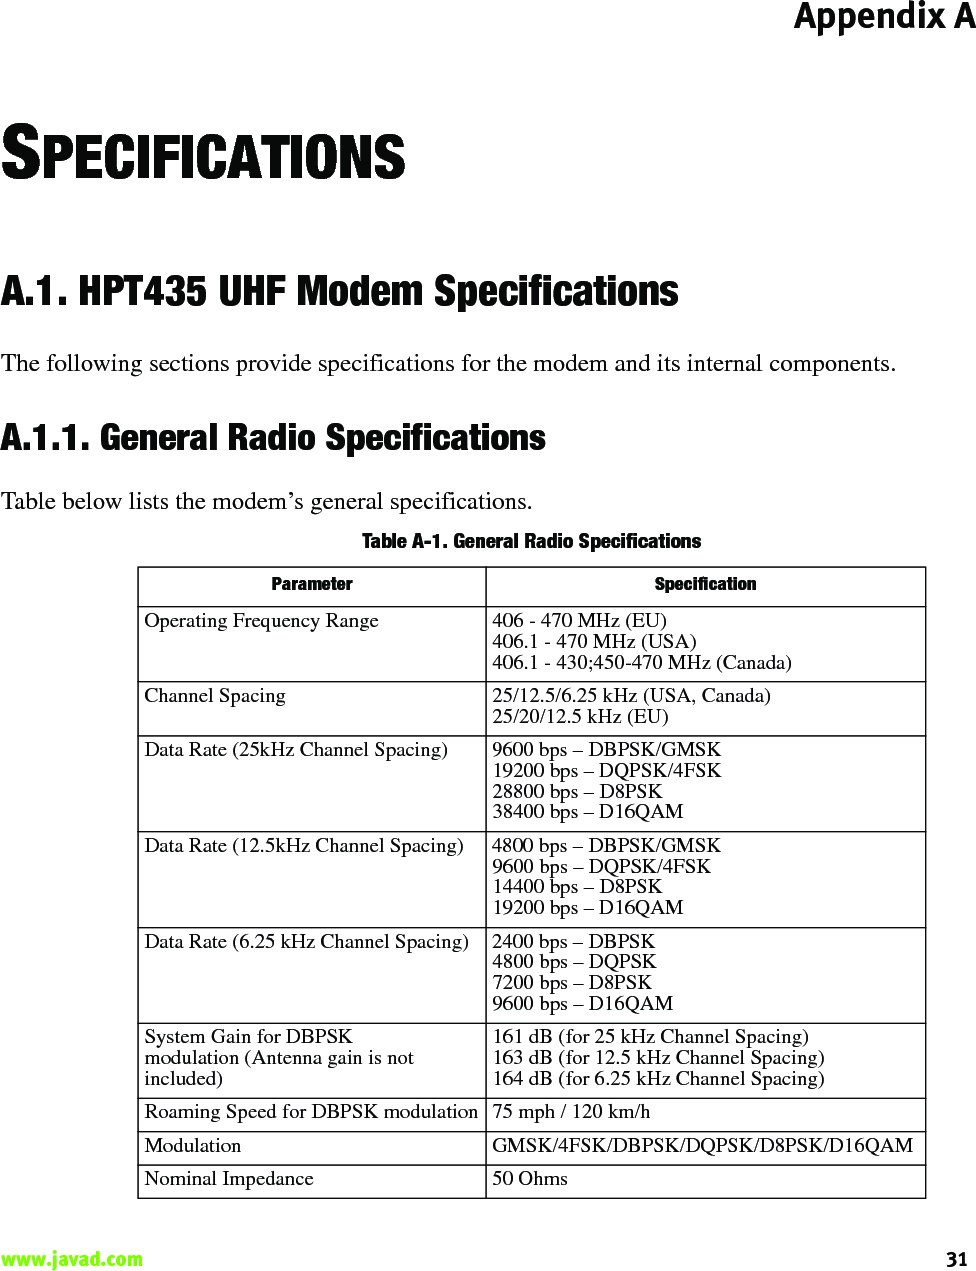 Appendix A31www.javad.com                                                                                                                                                    SPECIFICATIONSA.1. HPT435 UHF Modem SpecificationsThe following sections provide specifications for the modem and its internal components.A.1.1. General Radio SpecificationsTable below lists the modem’s general specifications.Table A-1. General Radio Specifications Parameter SpecificationOperating Frequency Range 406 - 470 MHz (EU)406.1 - 470 MHz (USA)406.1 - 430;450-470 MHz (Canada)Channel Spacing 25/12.5/6.25 kHz (USA, Canada)25/20/12.5 kHz (EU)Data Rate (25kHz Channel Spacing) 9600 bps – DBPSK/GMSK19200 bps – DQPSK/4FSK28800 bps – D8PSK38400 bps – D16QAMData Rate (12.5kHz Channel Spacing) 4800 bps – DBPSK/GMSK9600 bps – DQPSK/4FSK14400 bps – D8PSK19200 bps – D16QAMData Rate (6.25 kHz Channel Spacing) 2400 bps – DBPSK4800 bps – DQPSK7200 bps – D8PSK9600 bps – D16QAMSystem Gain for DBPSKmodulation (Antenna gain is notincluded)161 dB (for 25 kHz Channel Spacing)163 dB (for 12.5 kHz Channel Spacing)164 dB (for 6.25 kHz Channel Spacing)Roaming Speed for DBPSK modulation 75 mph / 120 km/hModulation GMSK/4FSK/DBPSK/DQPSK/D8PSK/D16QAM Nominal Impedance 50 Ohms